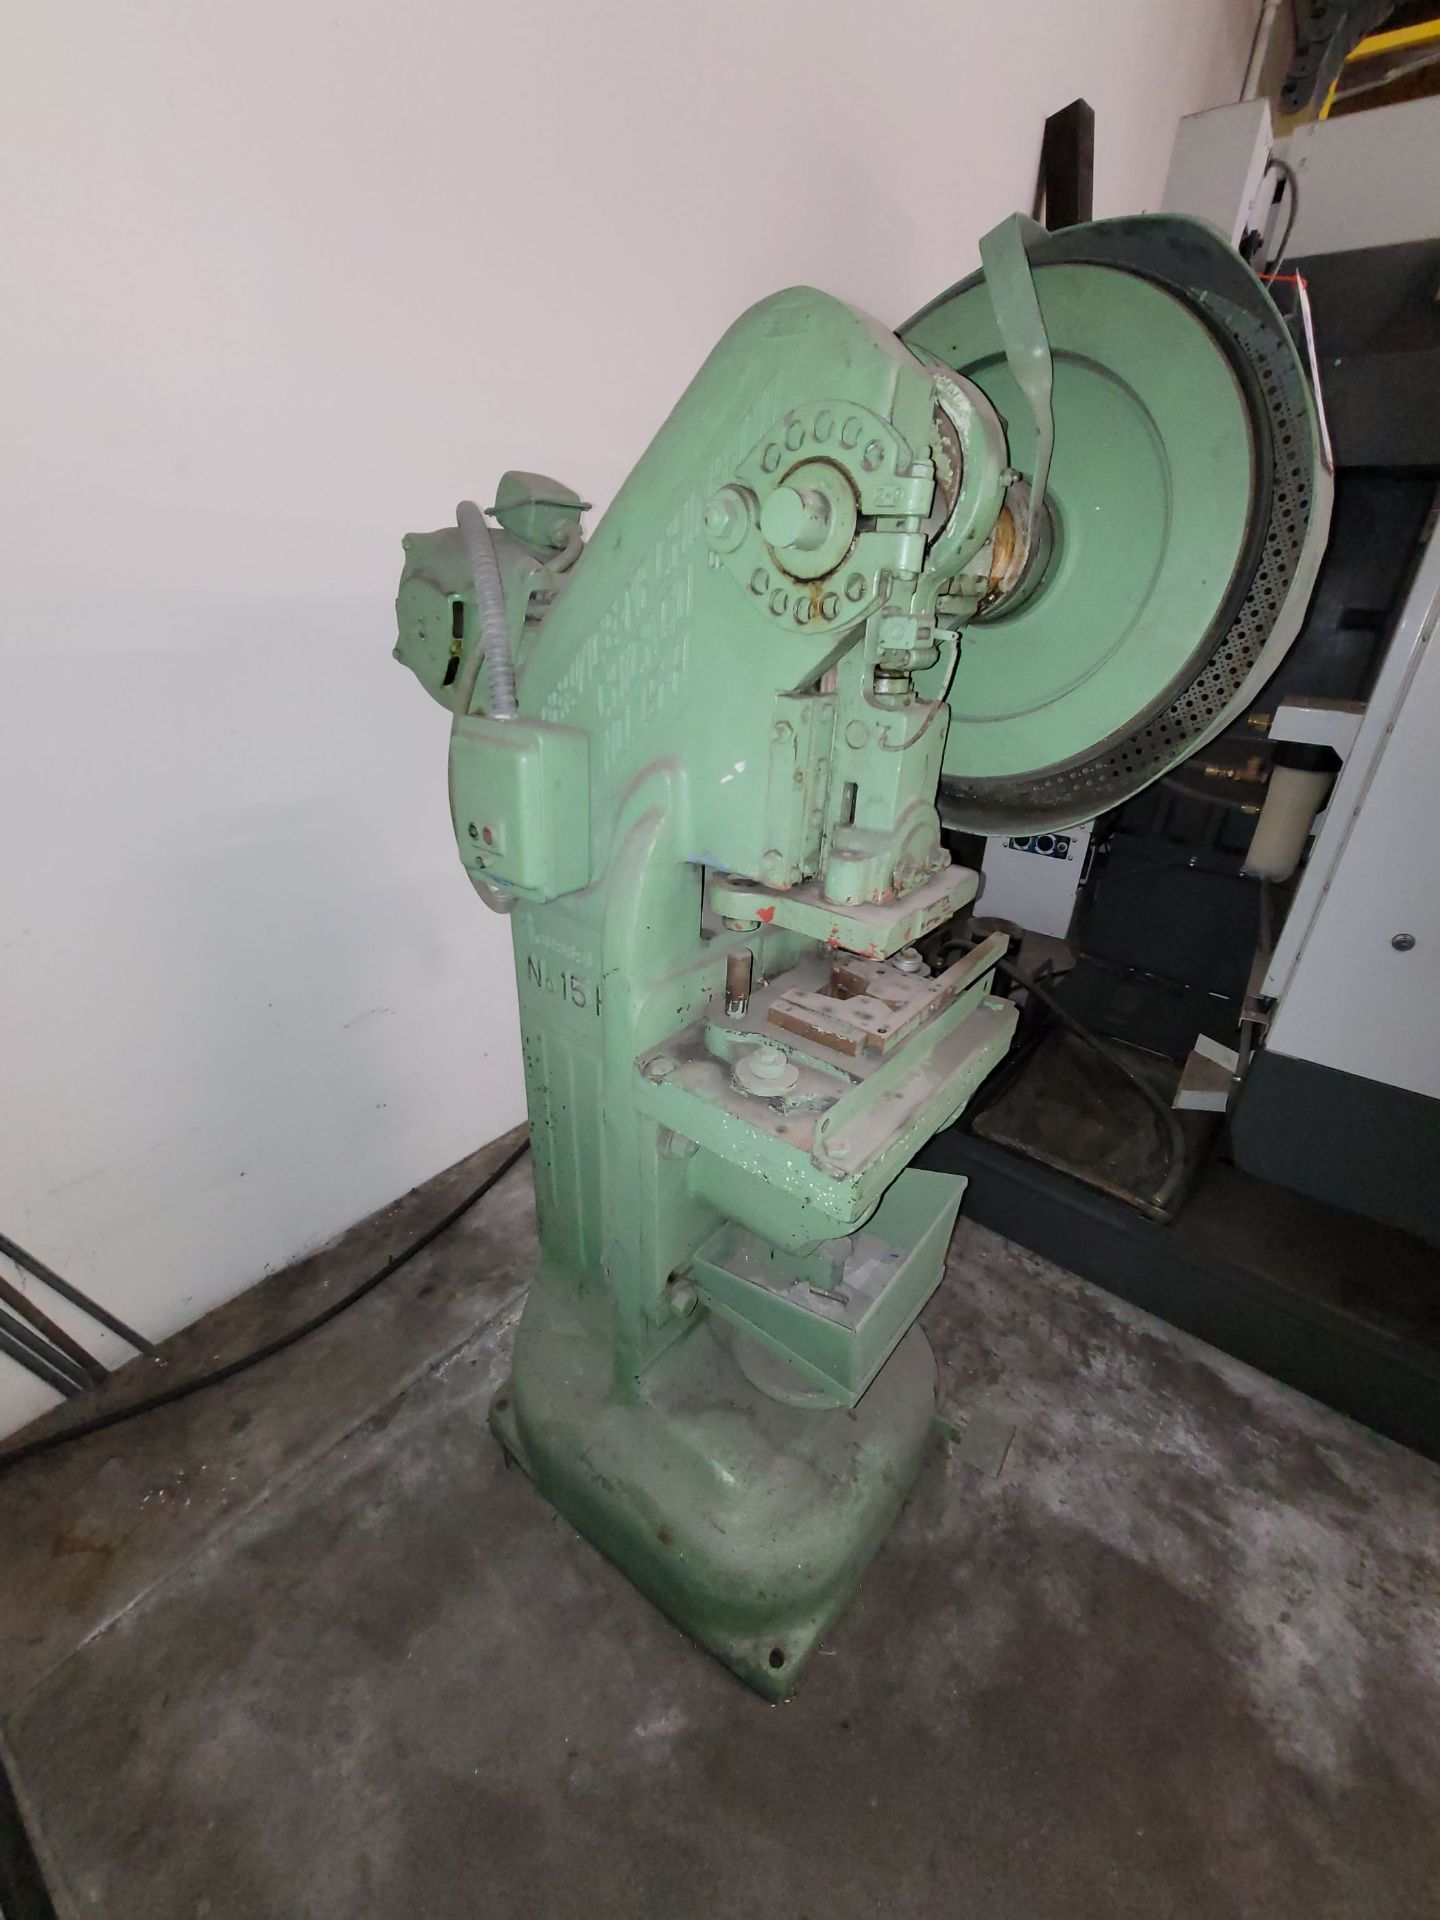 ROUSSELLE NO. 15H STAMPING PRESS, 15-TON, 2" STROKE, 160 SPM, S/N 441 - Image 2 of 4